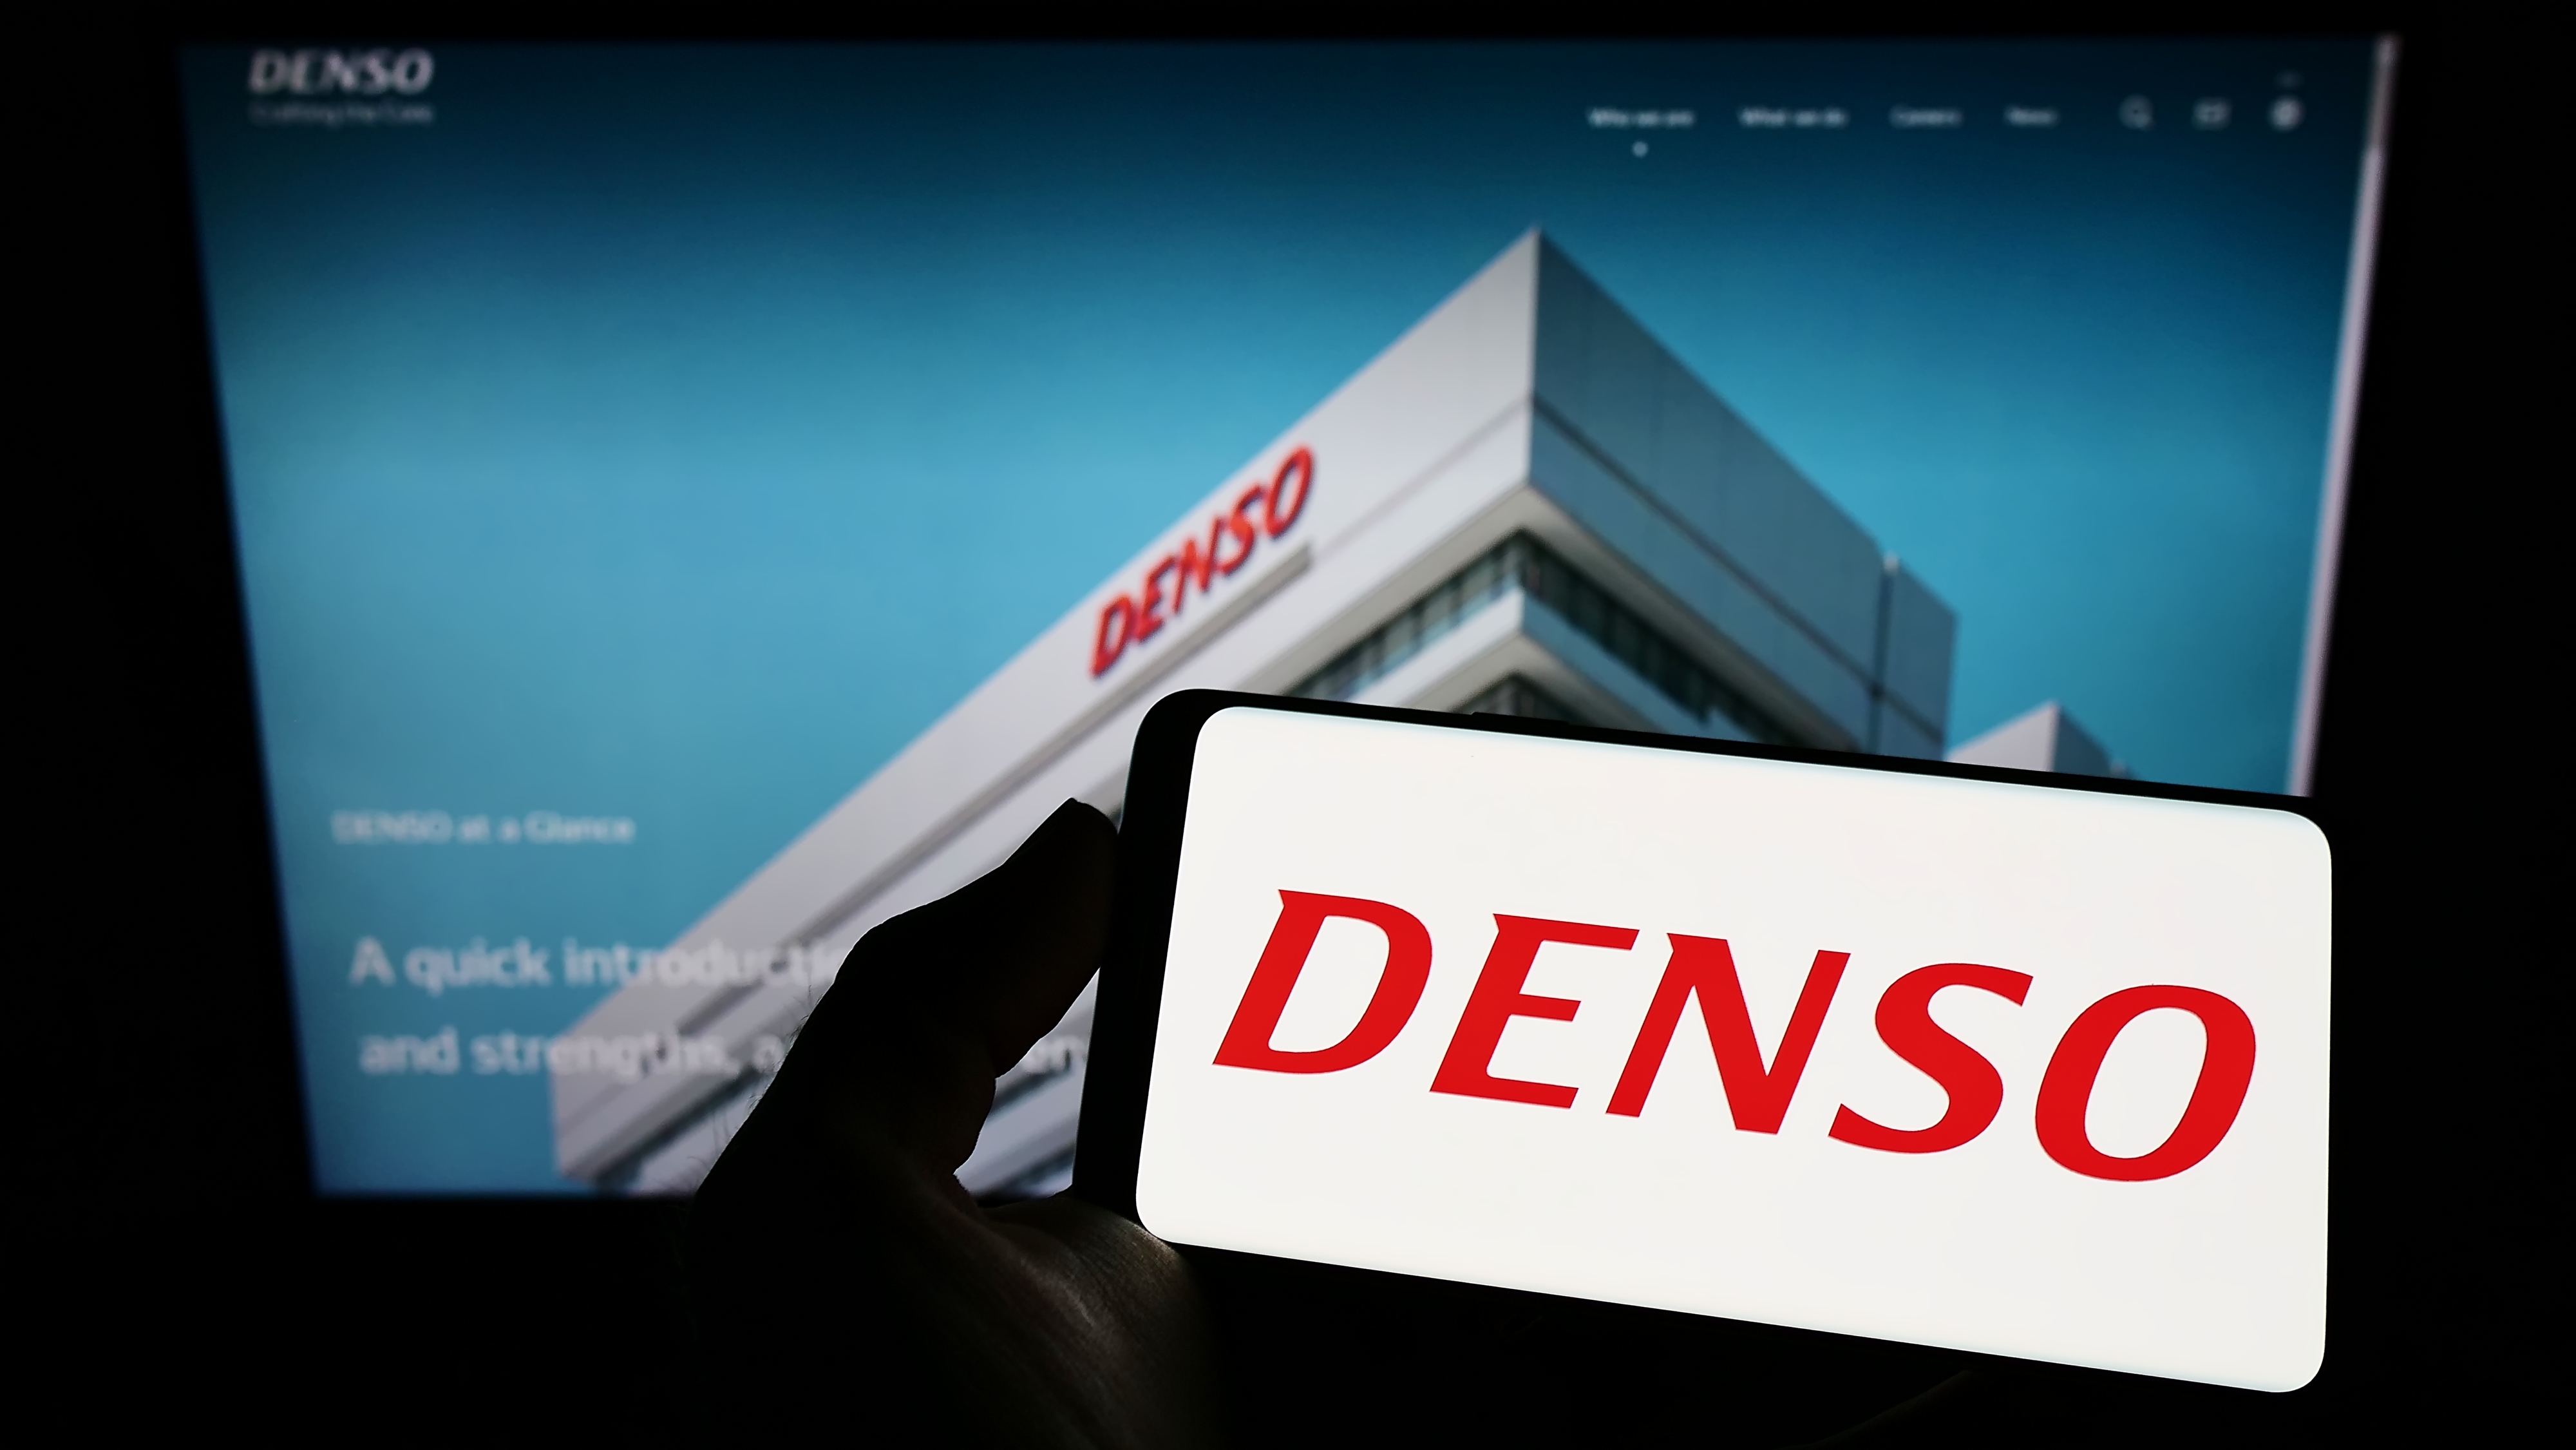 Denso Gears up to Tackle Shift to Electrification Head-on